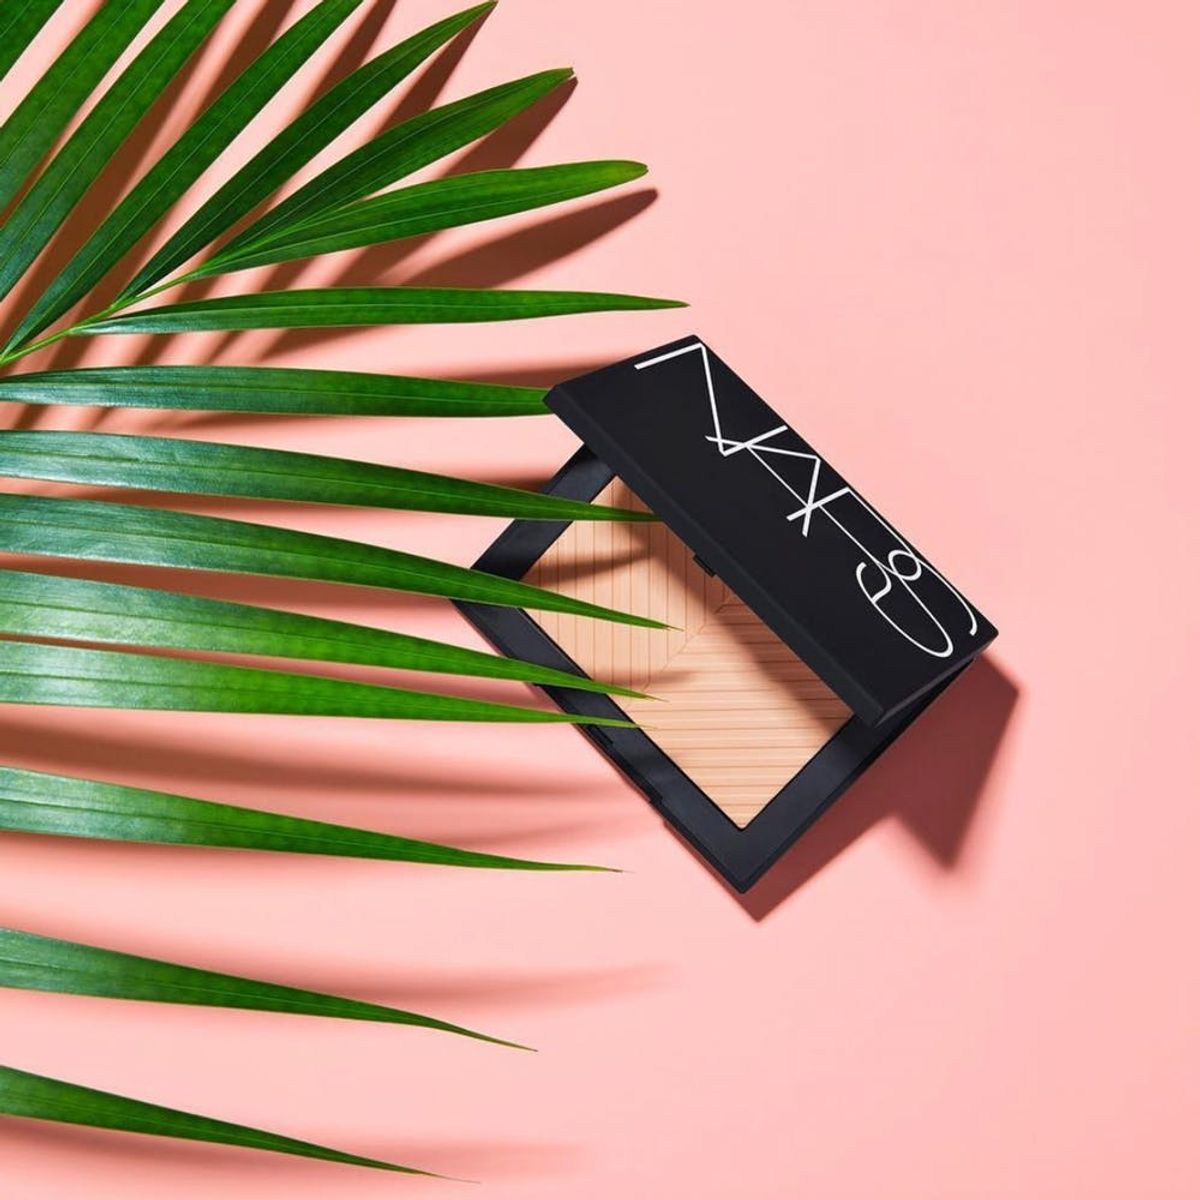 Nars Is Now Testing on Animals, and People Are Mad